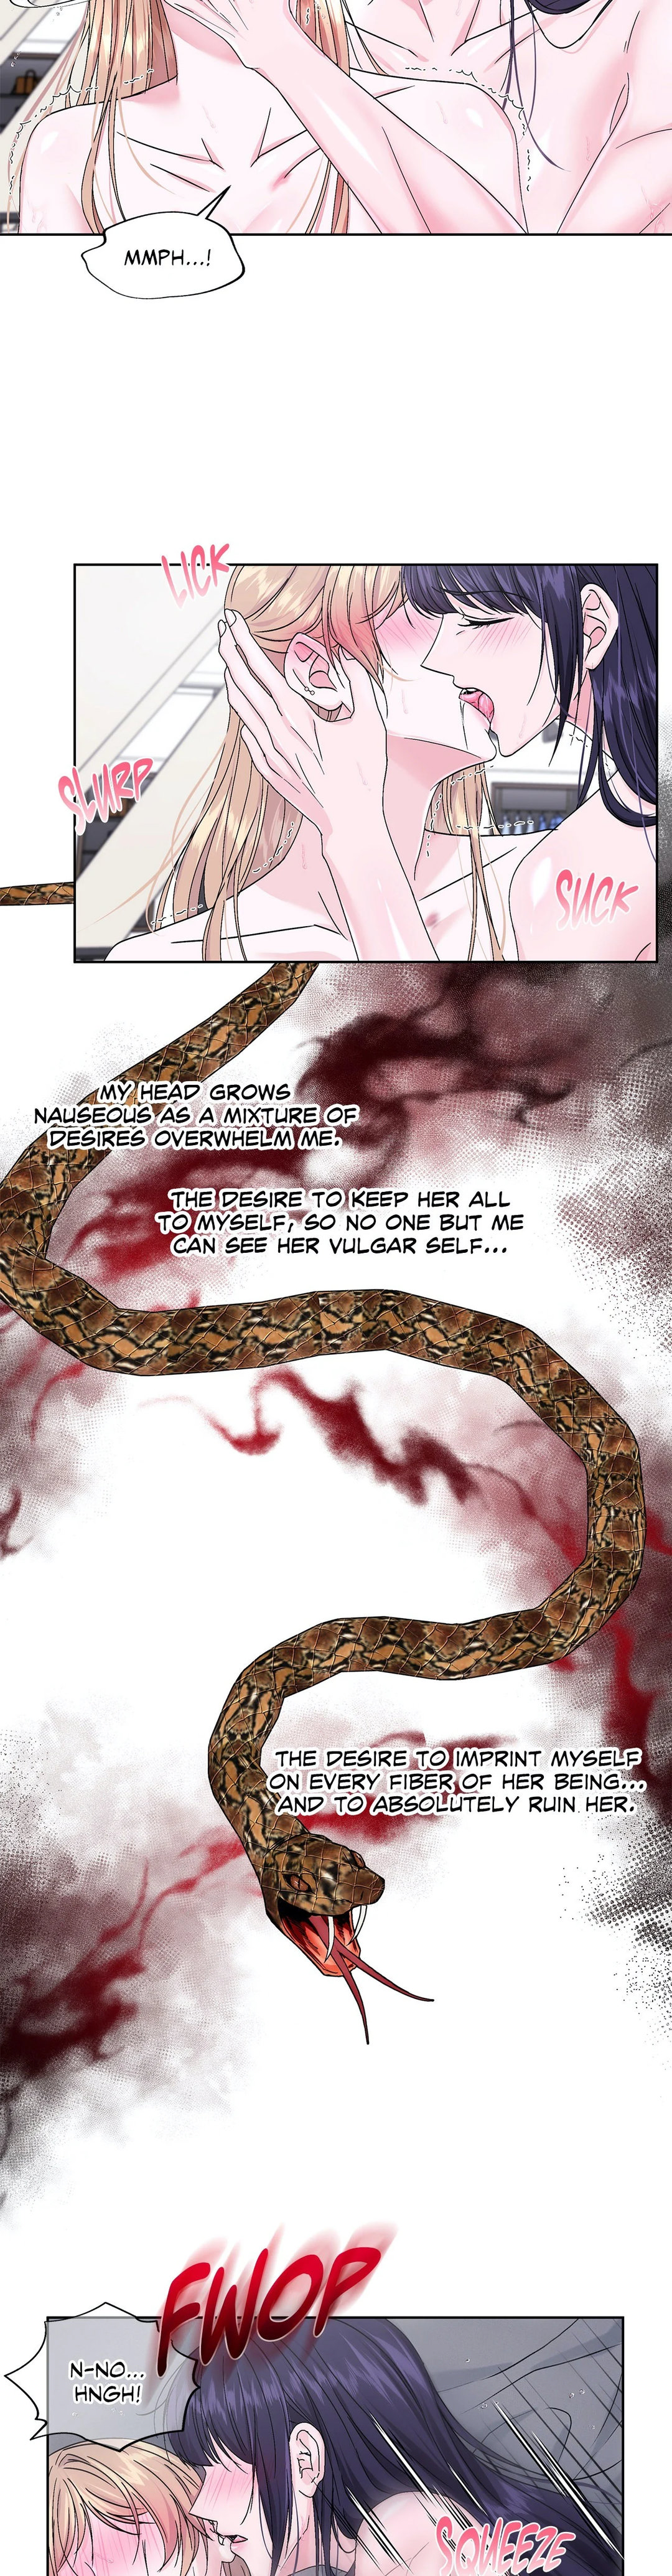 Lilith 2 - Chapter 70 Page 30